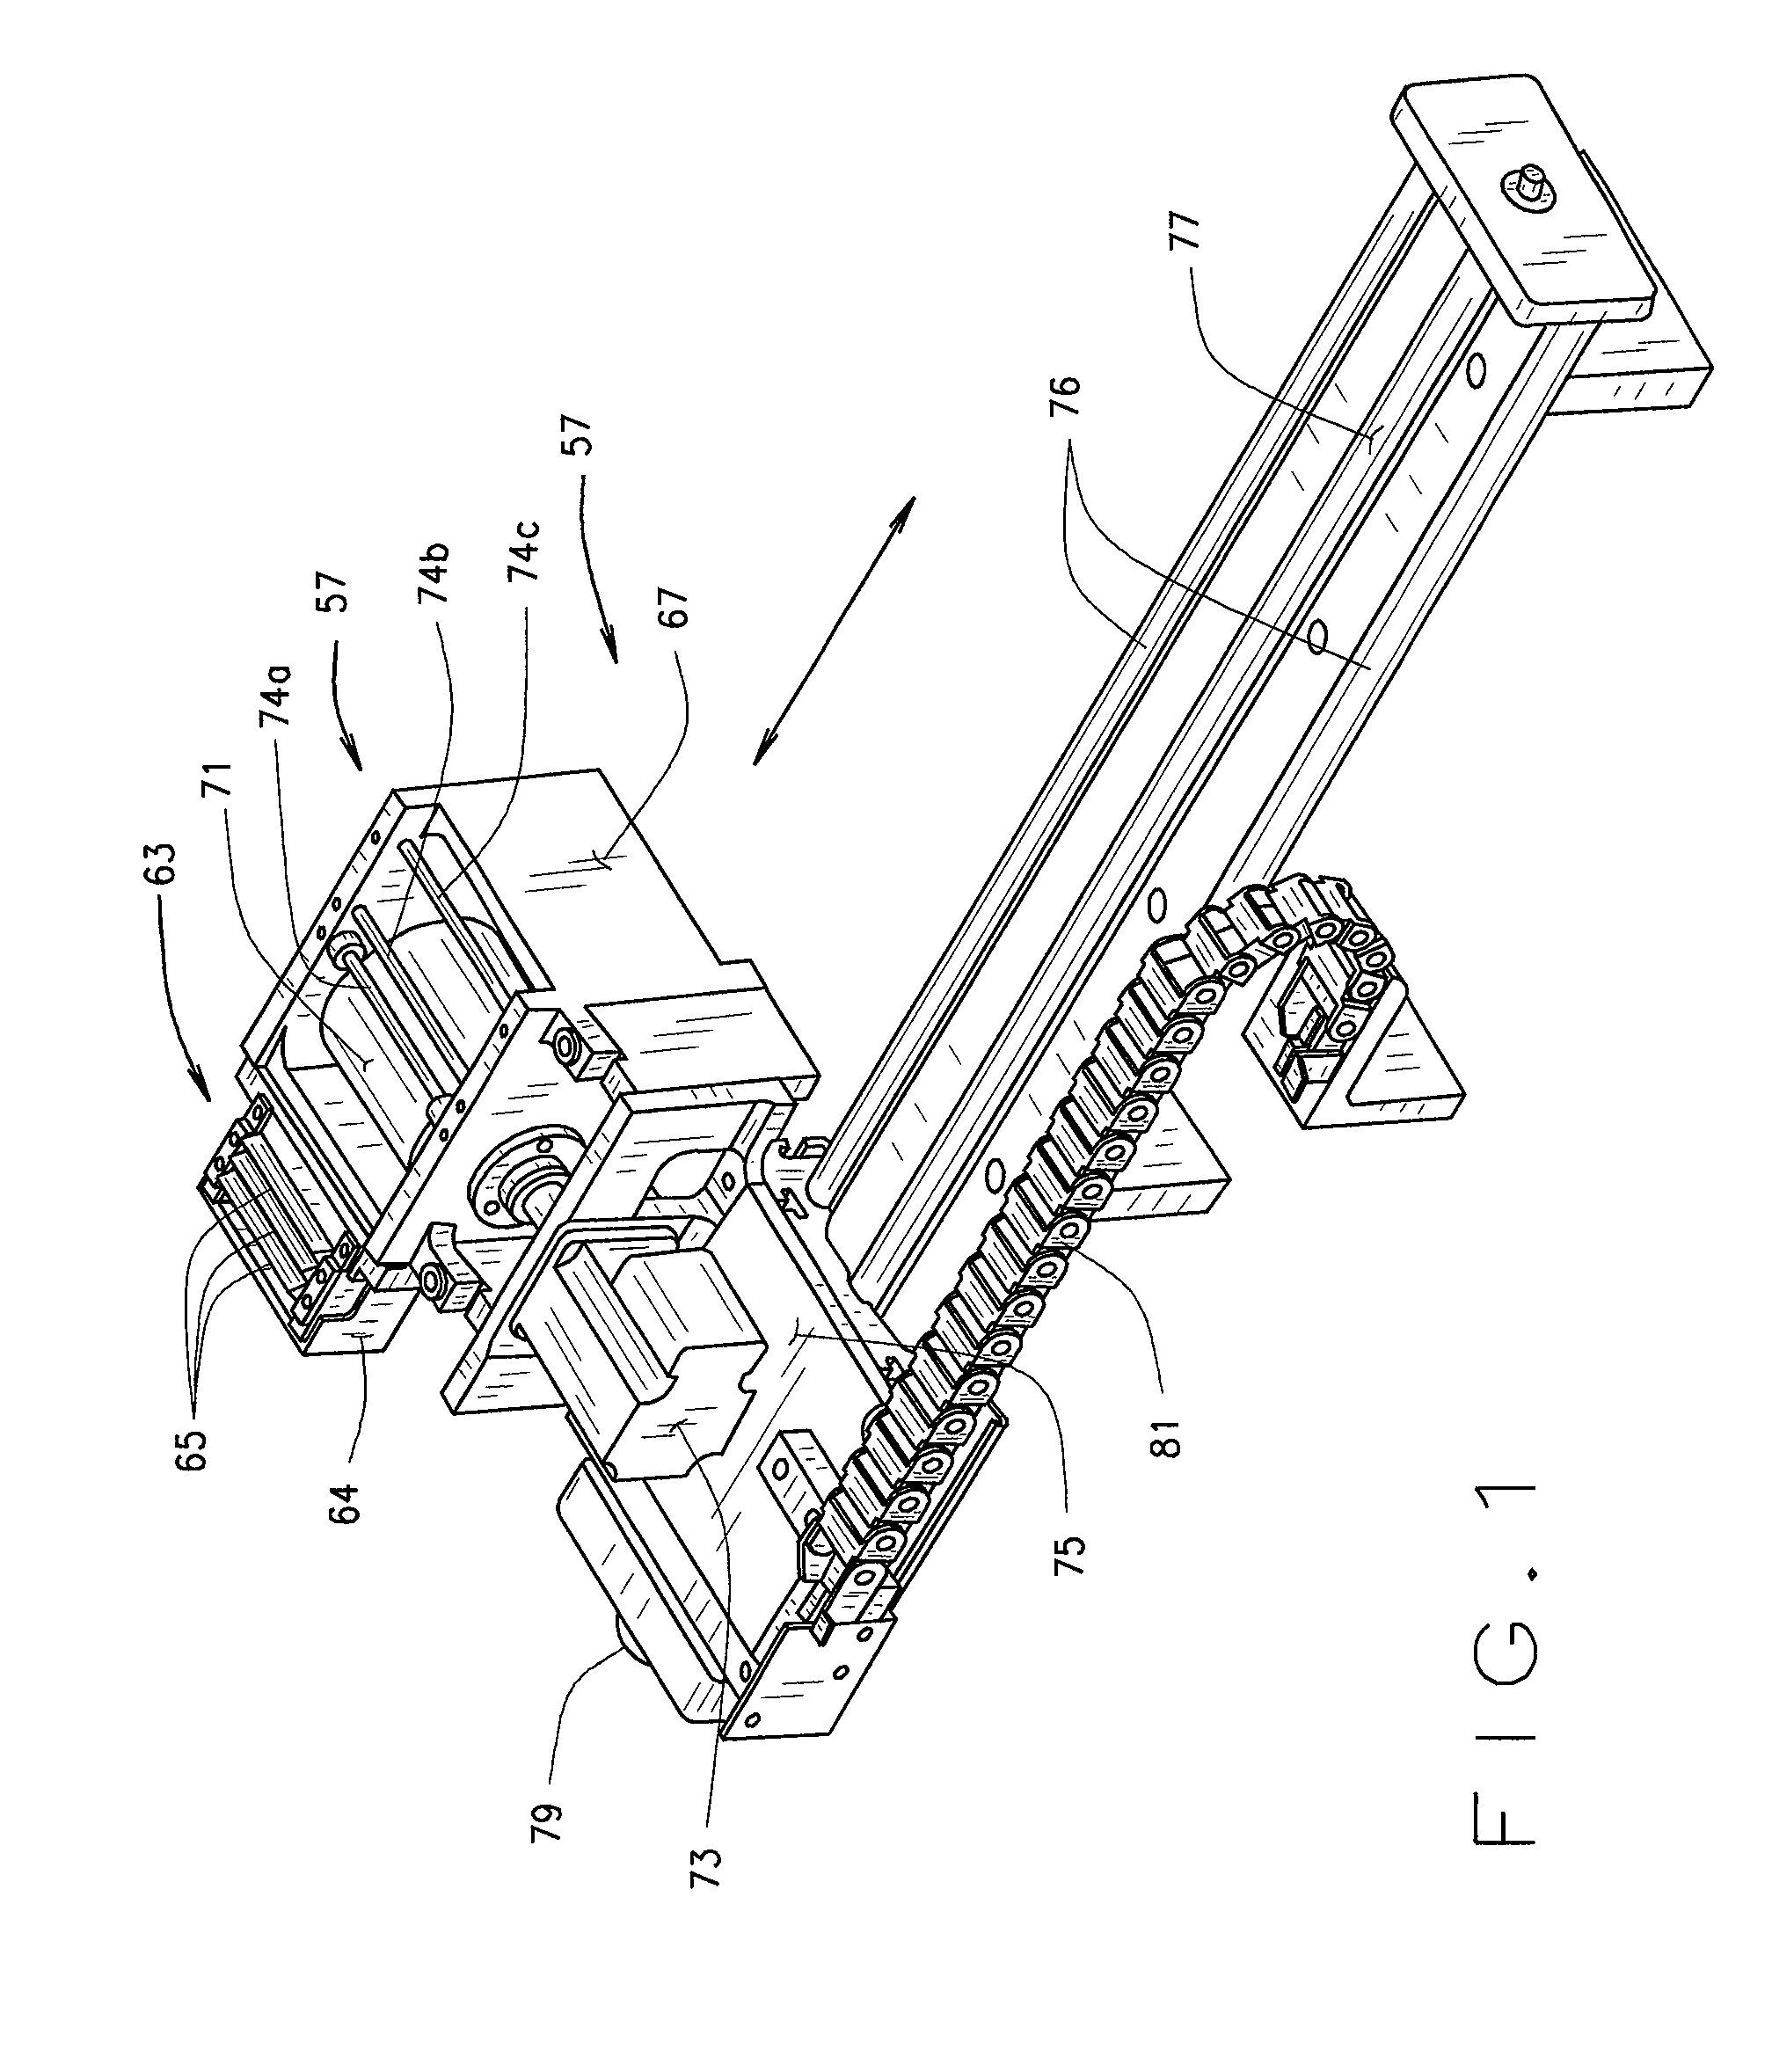 Apparatus for and a method of determining condition of hot melt adhesive for binding of a perfect bound book